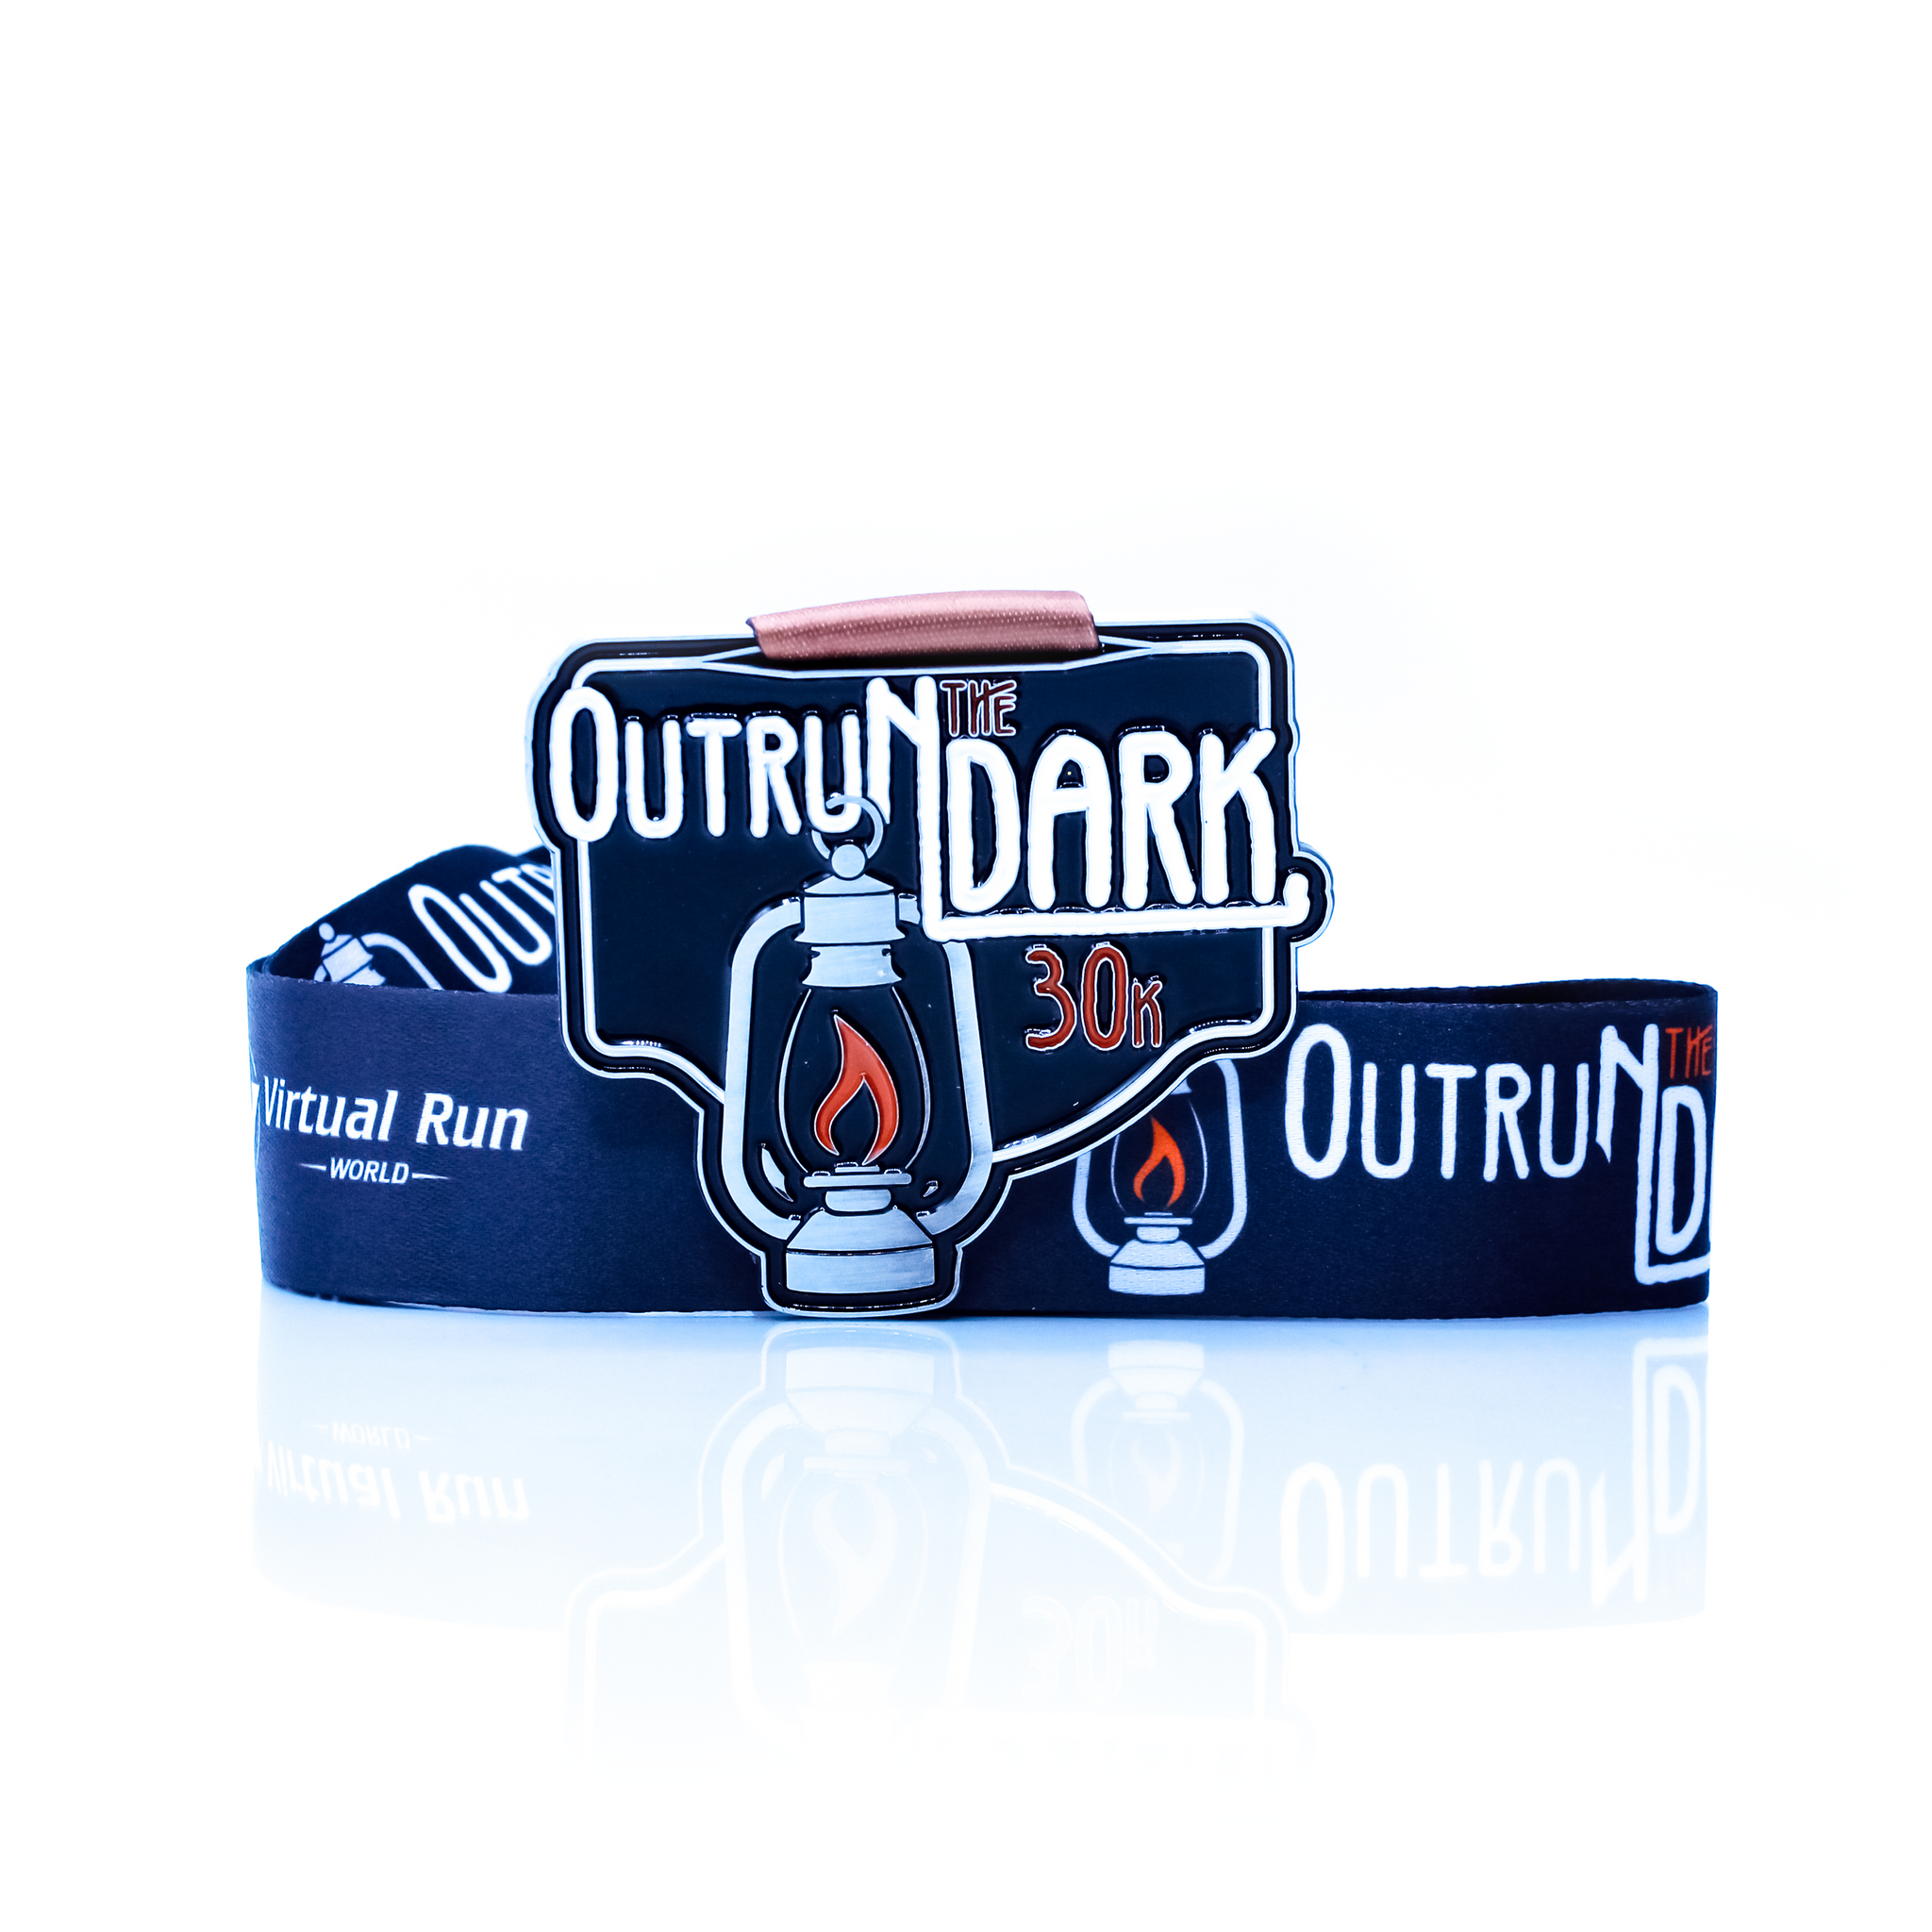 Outrun the Dark Challenge - Entry + Medal